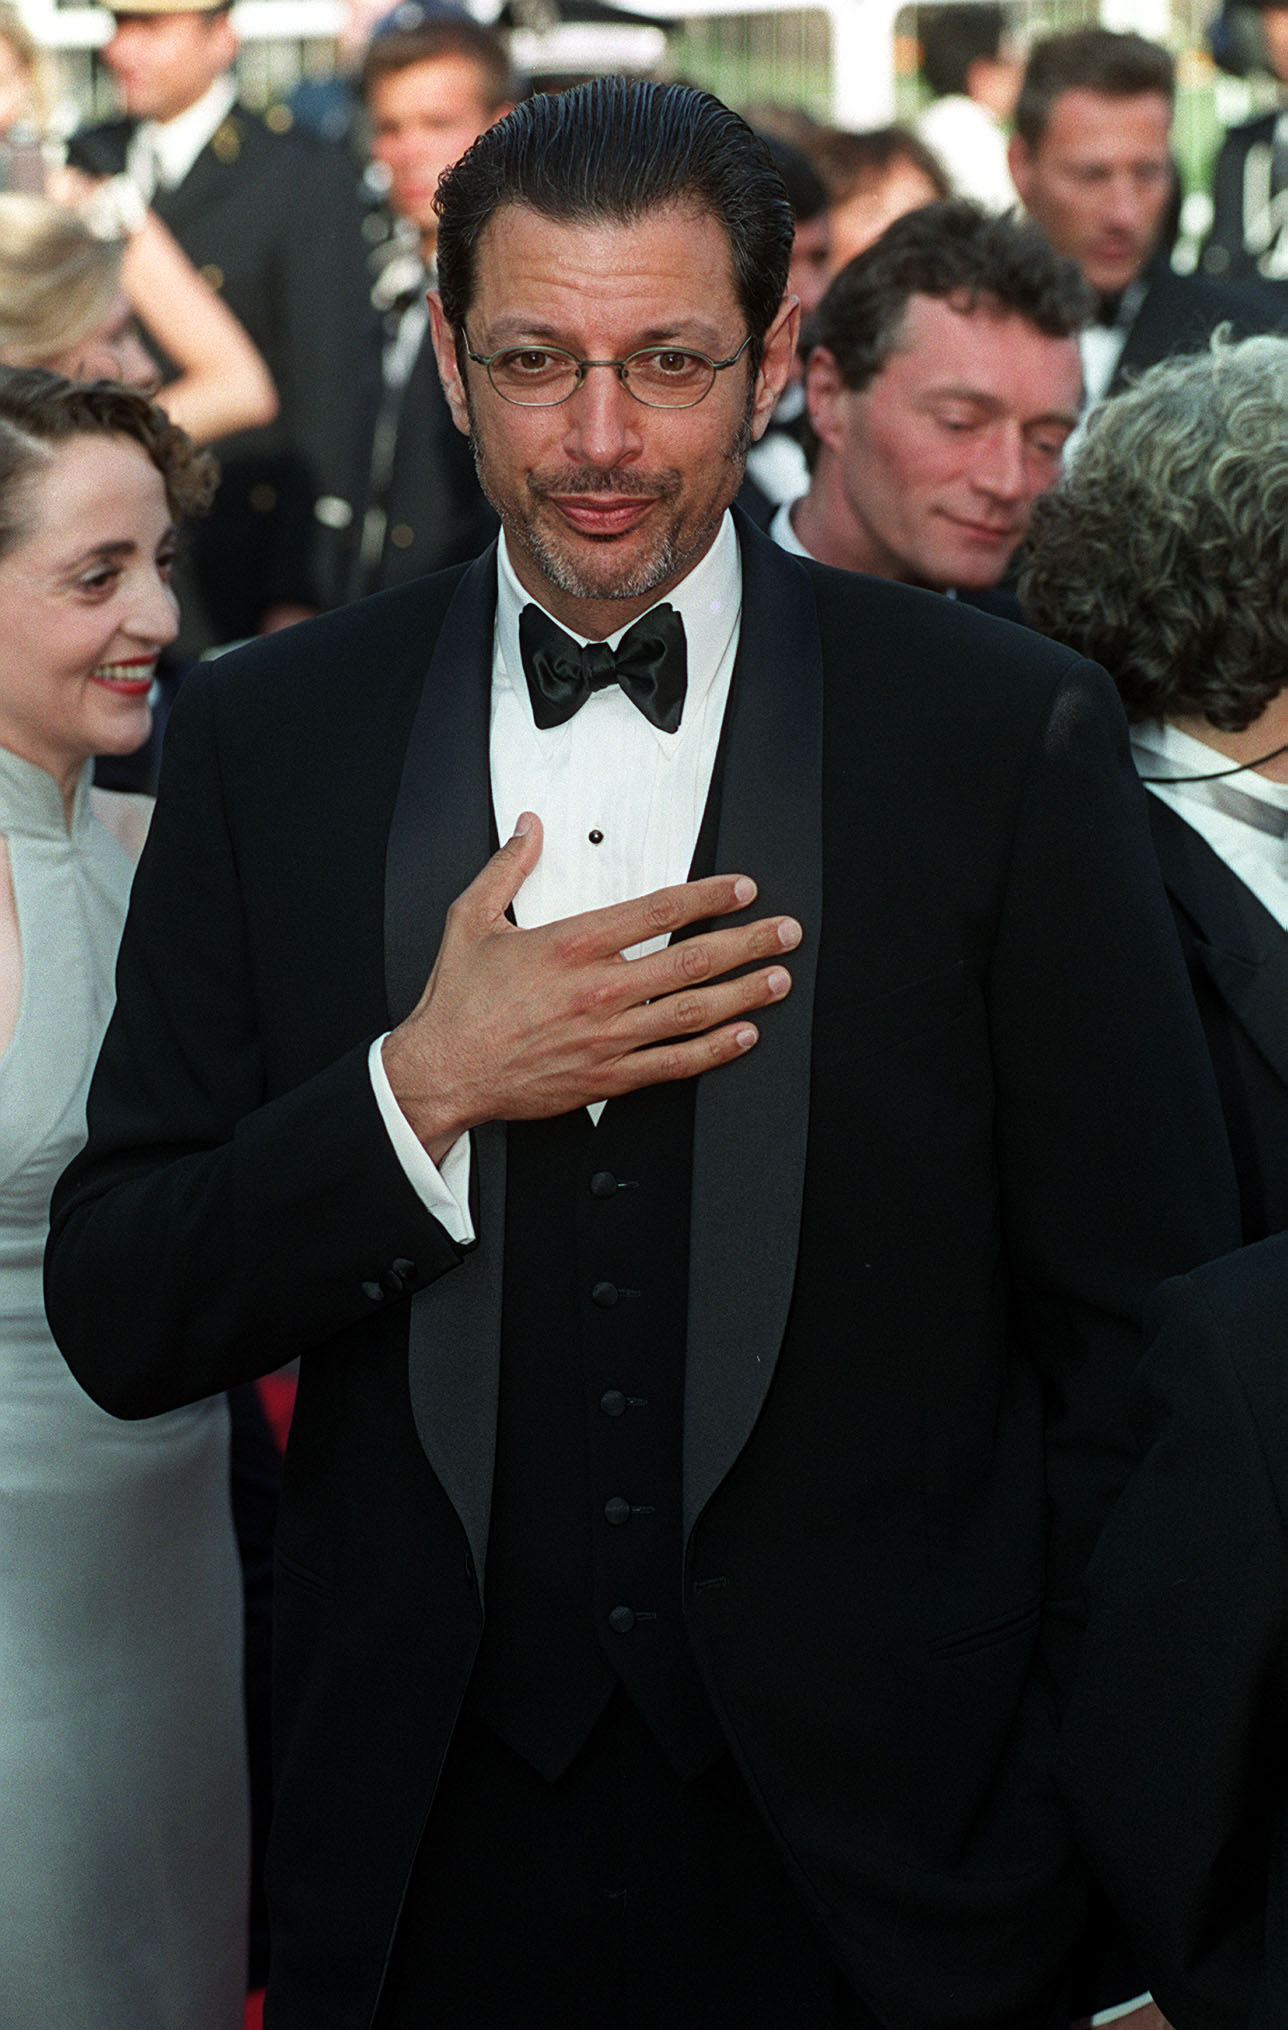 Man at event in black tuxedo with bow tie, hand on chest, smiling